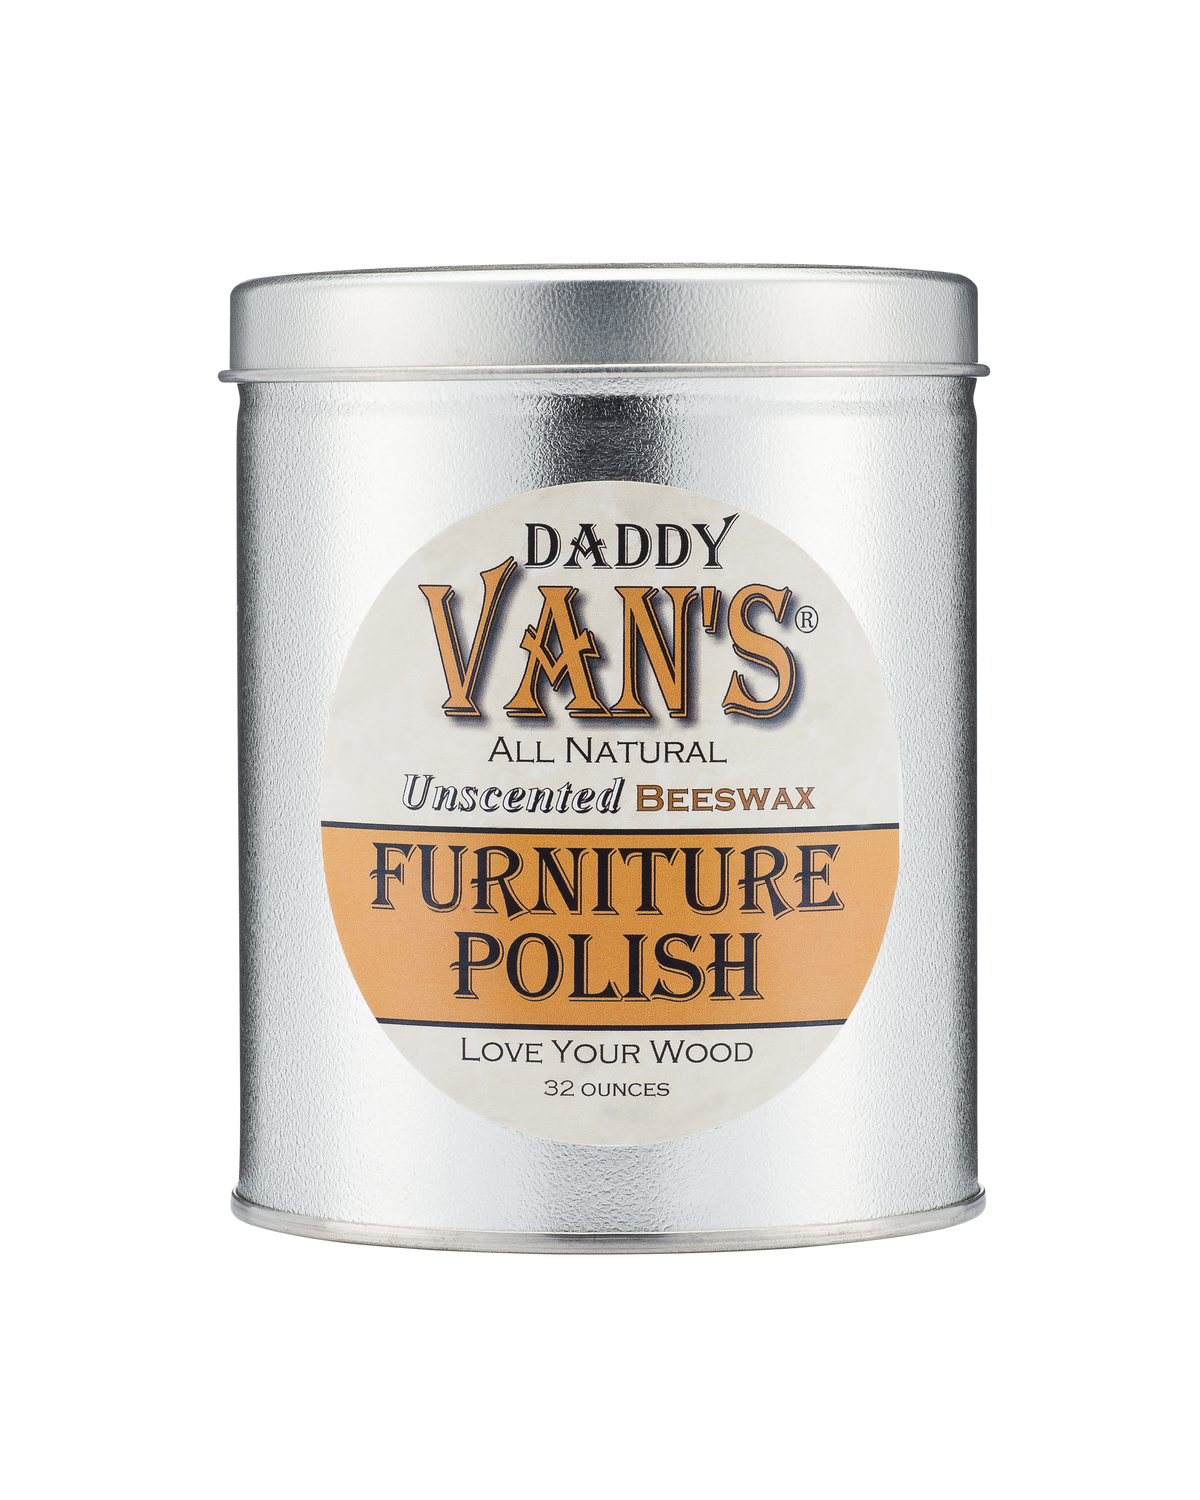 Daddy Van's All Natural Unscented Beeswax Furniture Polish - Big Daddy - 32 Ounces